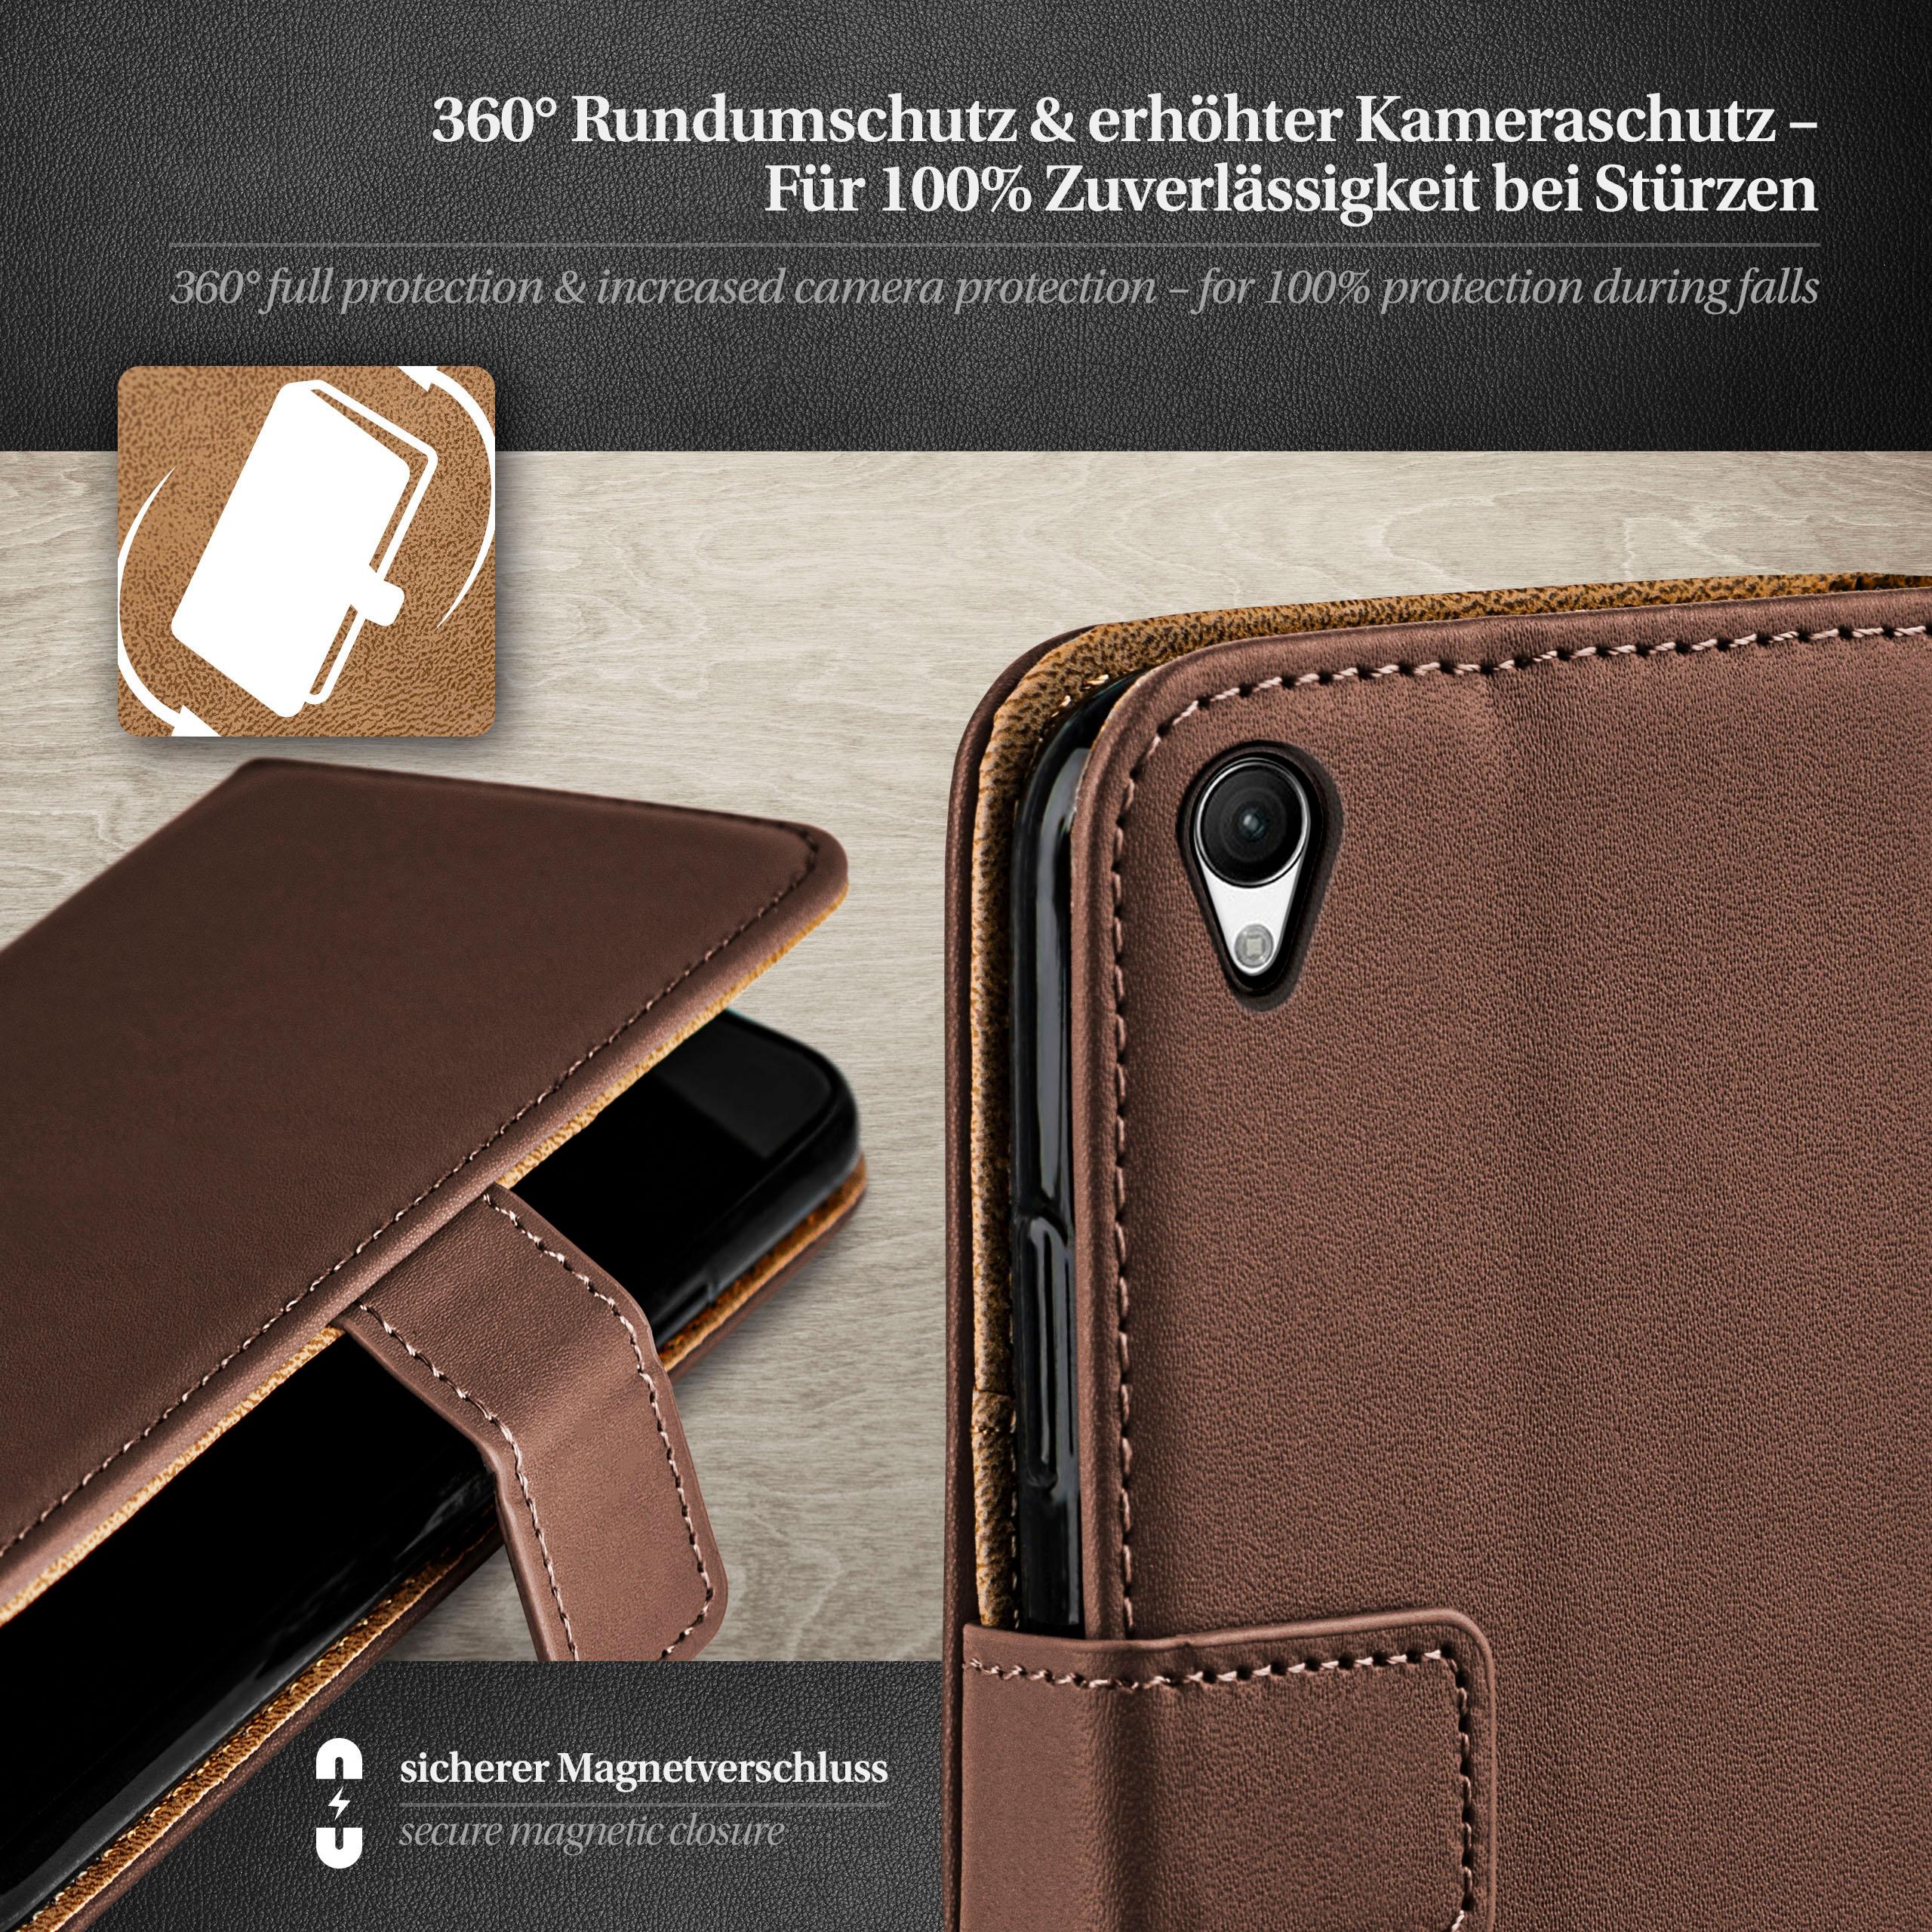 Book Case, Sony, Oxide-Brown Xperia Bookcover, MOEX Z3,